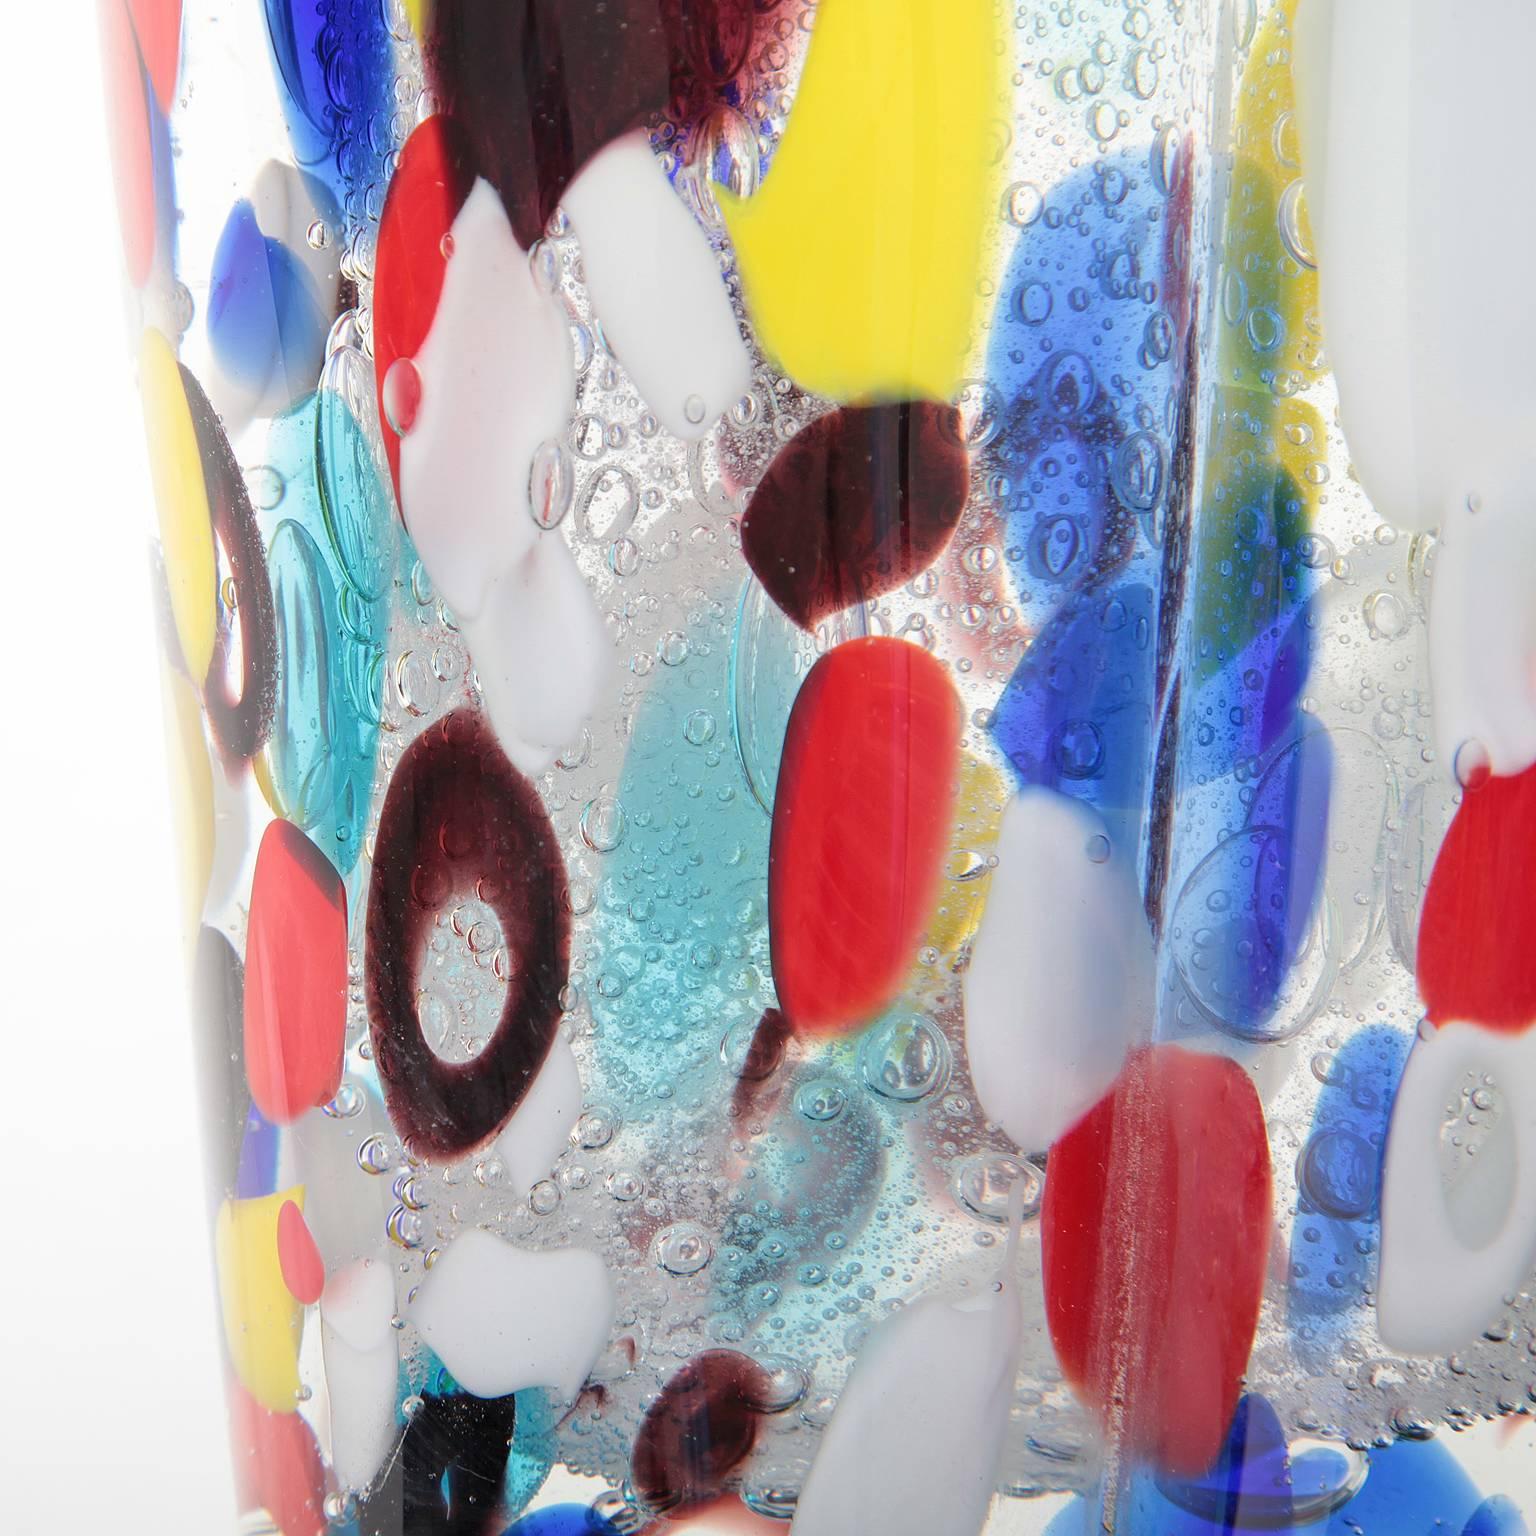 A glass sculpture on a round base in the form of a female torso. The piece is streaked with colorful dots in the typical manner.